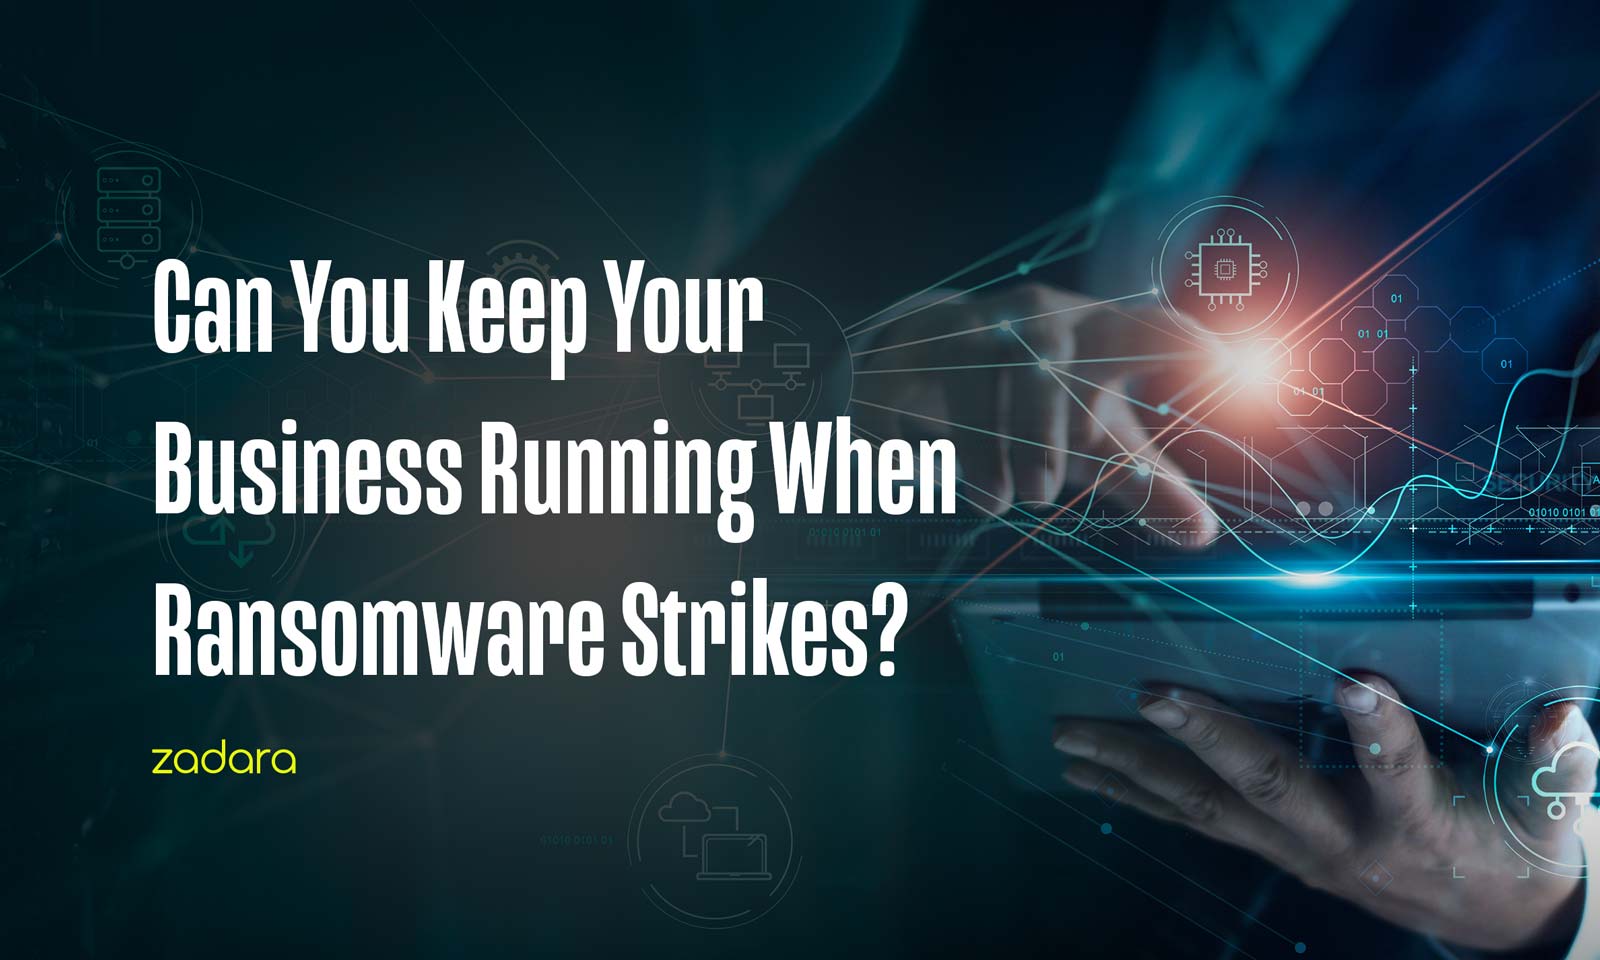 Can You Keep Your Business Running When Ransomware Strikes?